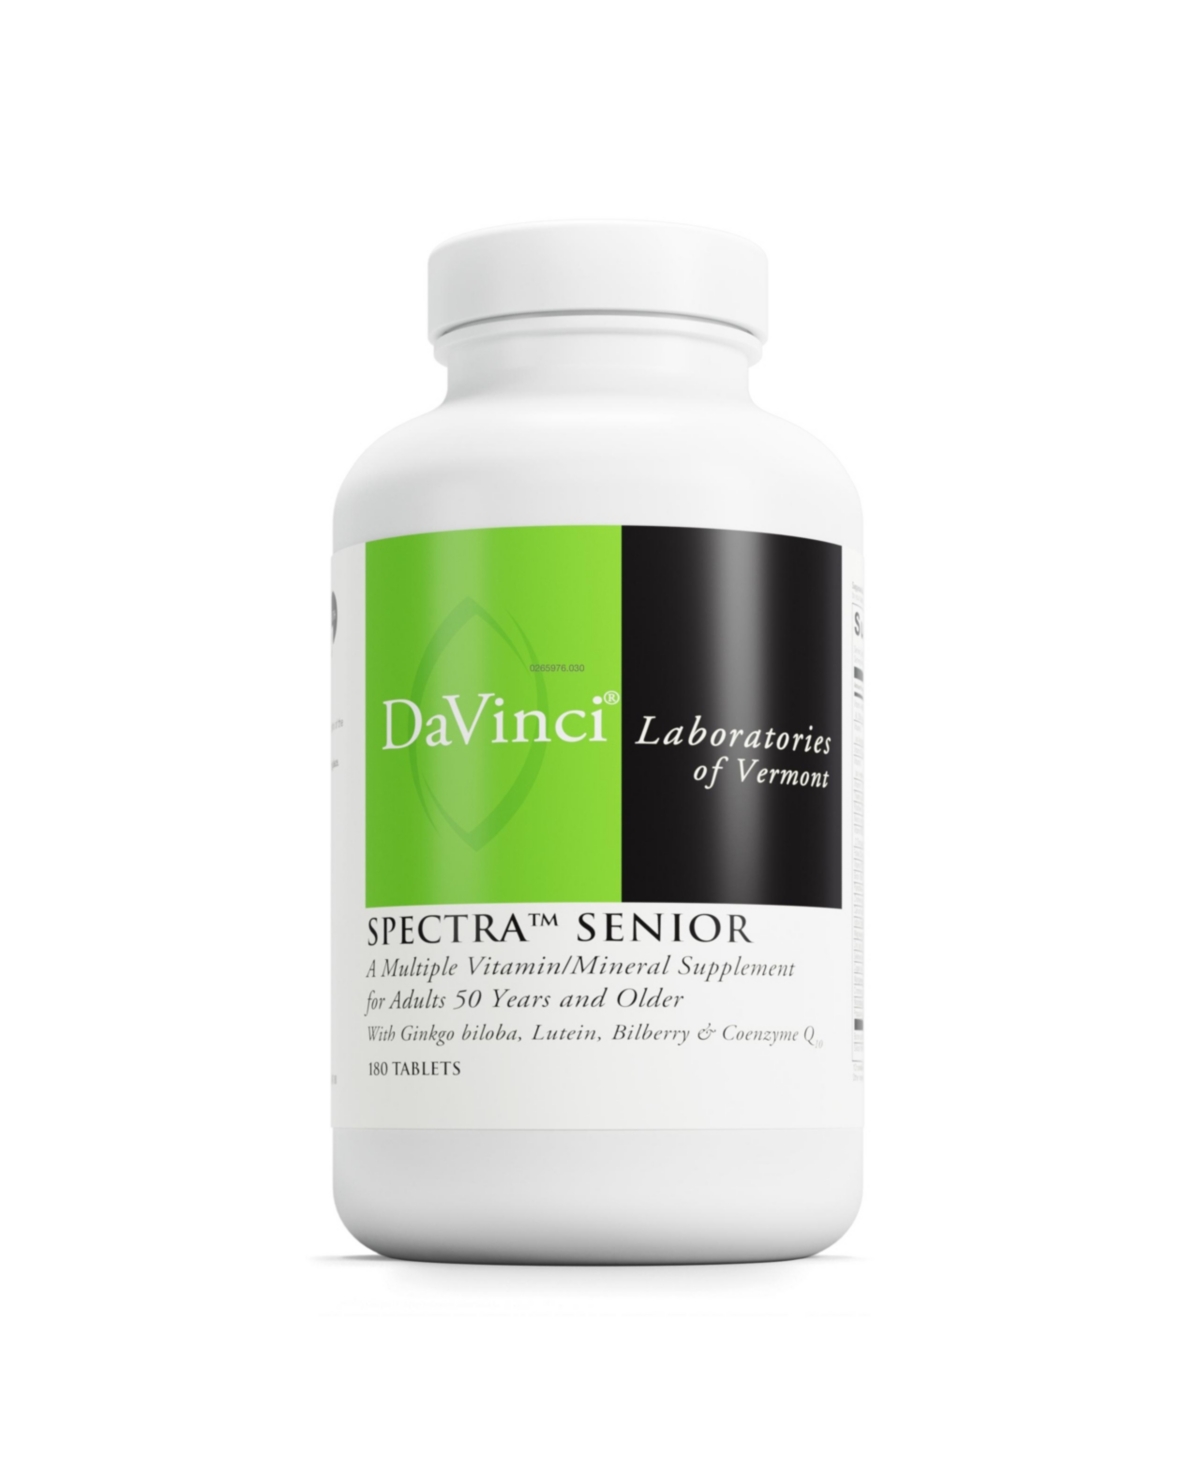 DaVinci Labs Spectra Senior - Dietary Supplement for Cardiovascular, Ocular and Antioxidant Support - With Vitamins, Minerals, Co